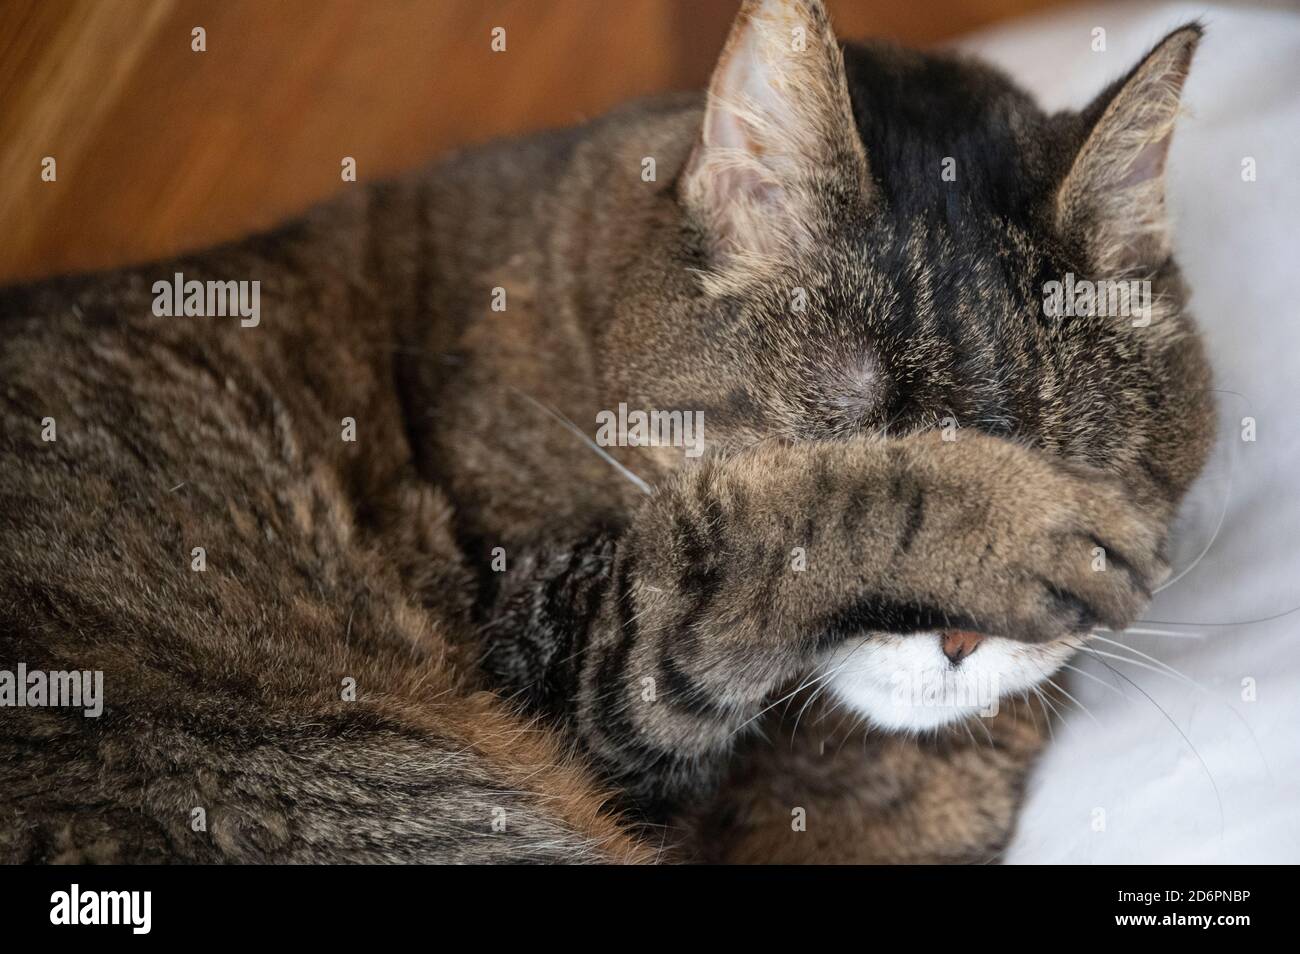 adult tabby cat cleaning face with paw Stock Photo